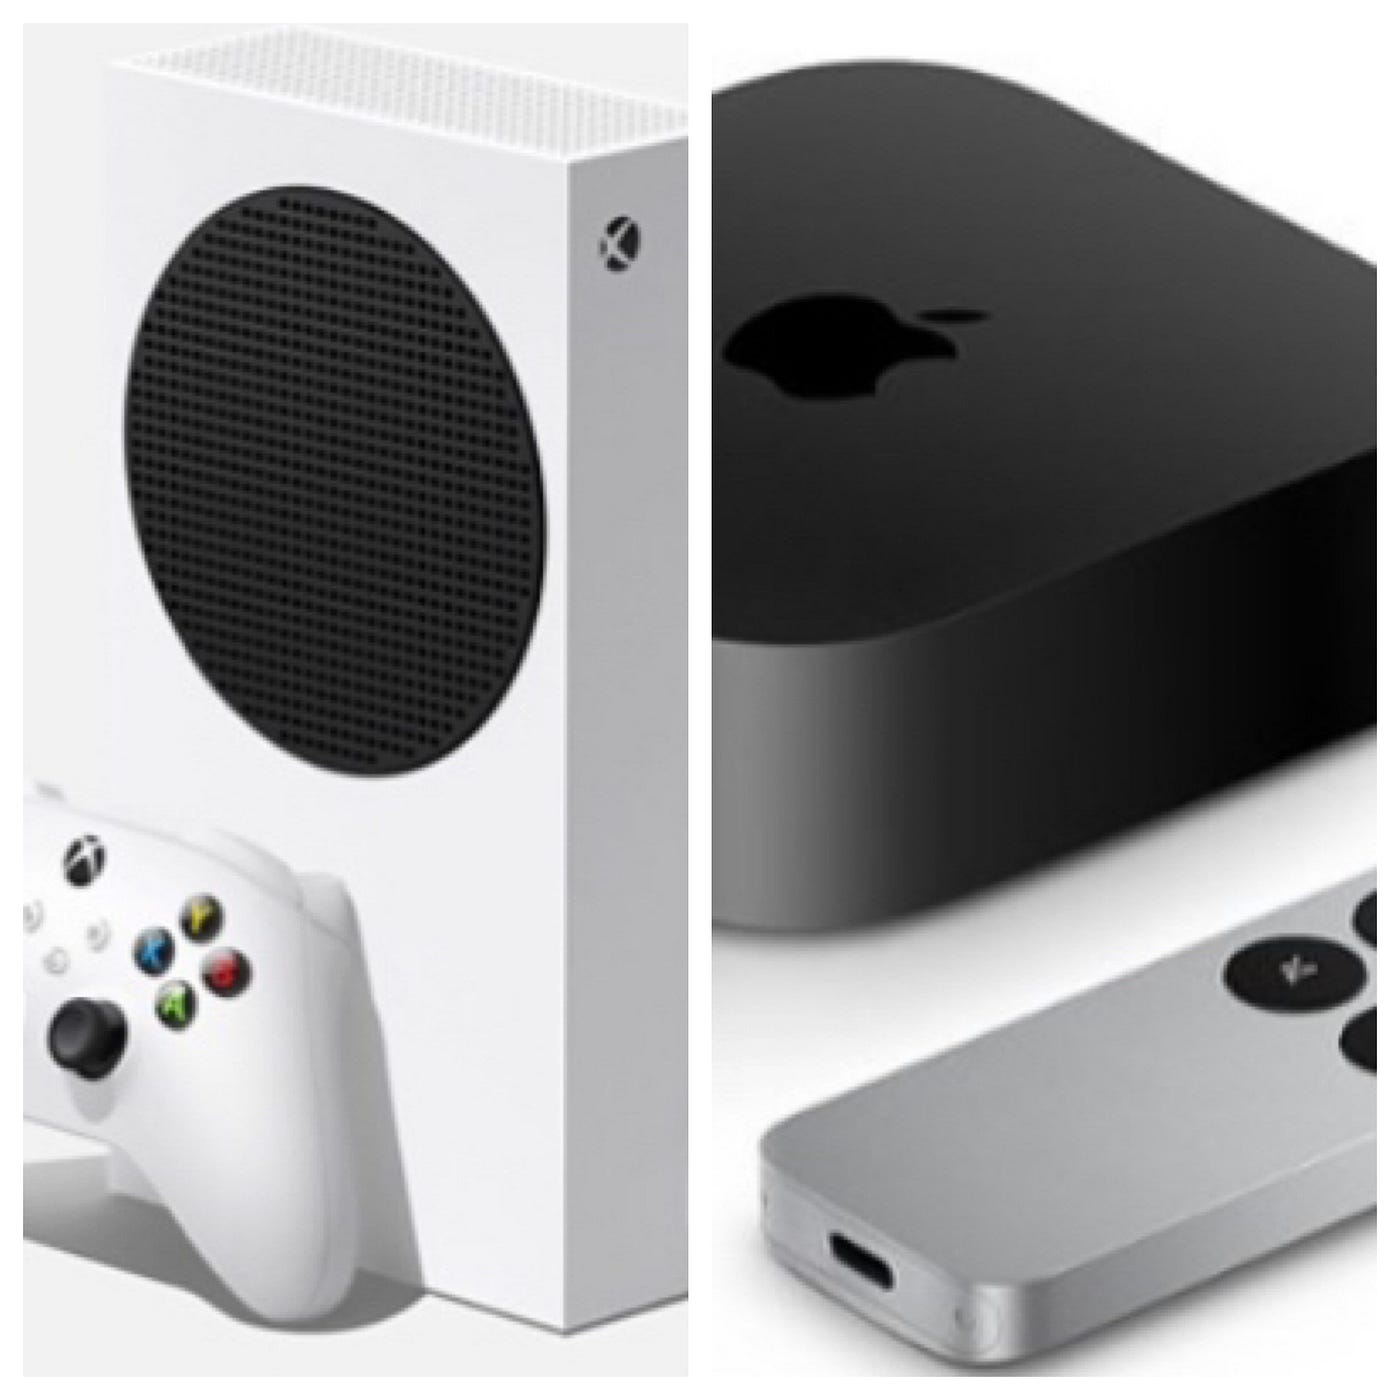 Xbox Series S: A budget-friendly new Xbox to replace your Apple TV